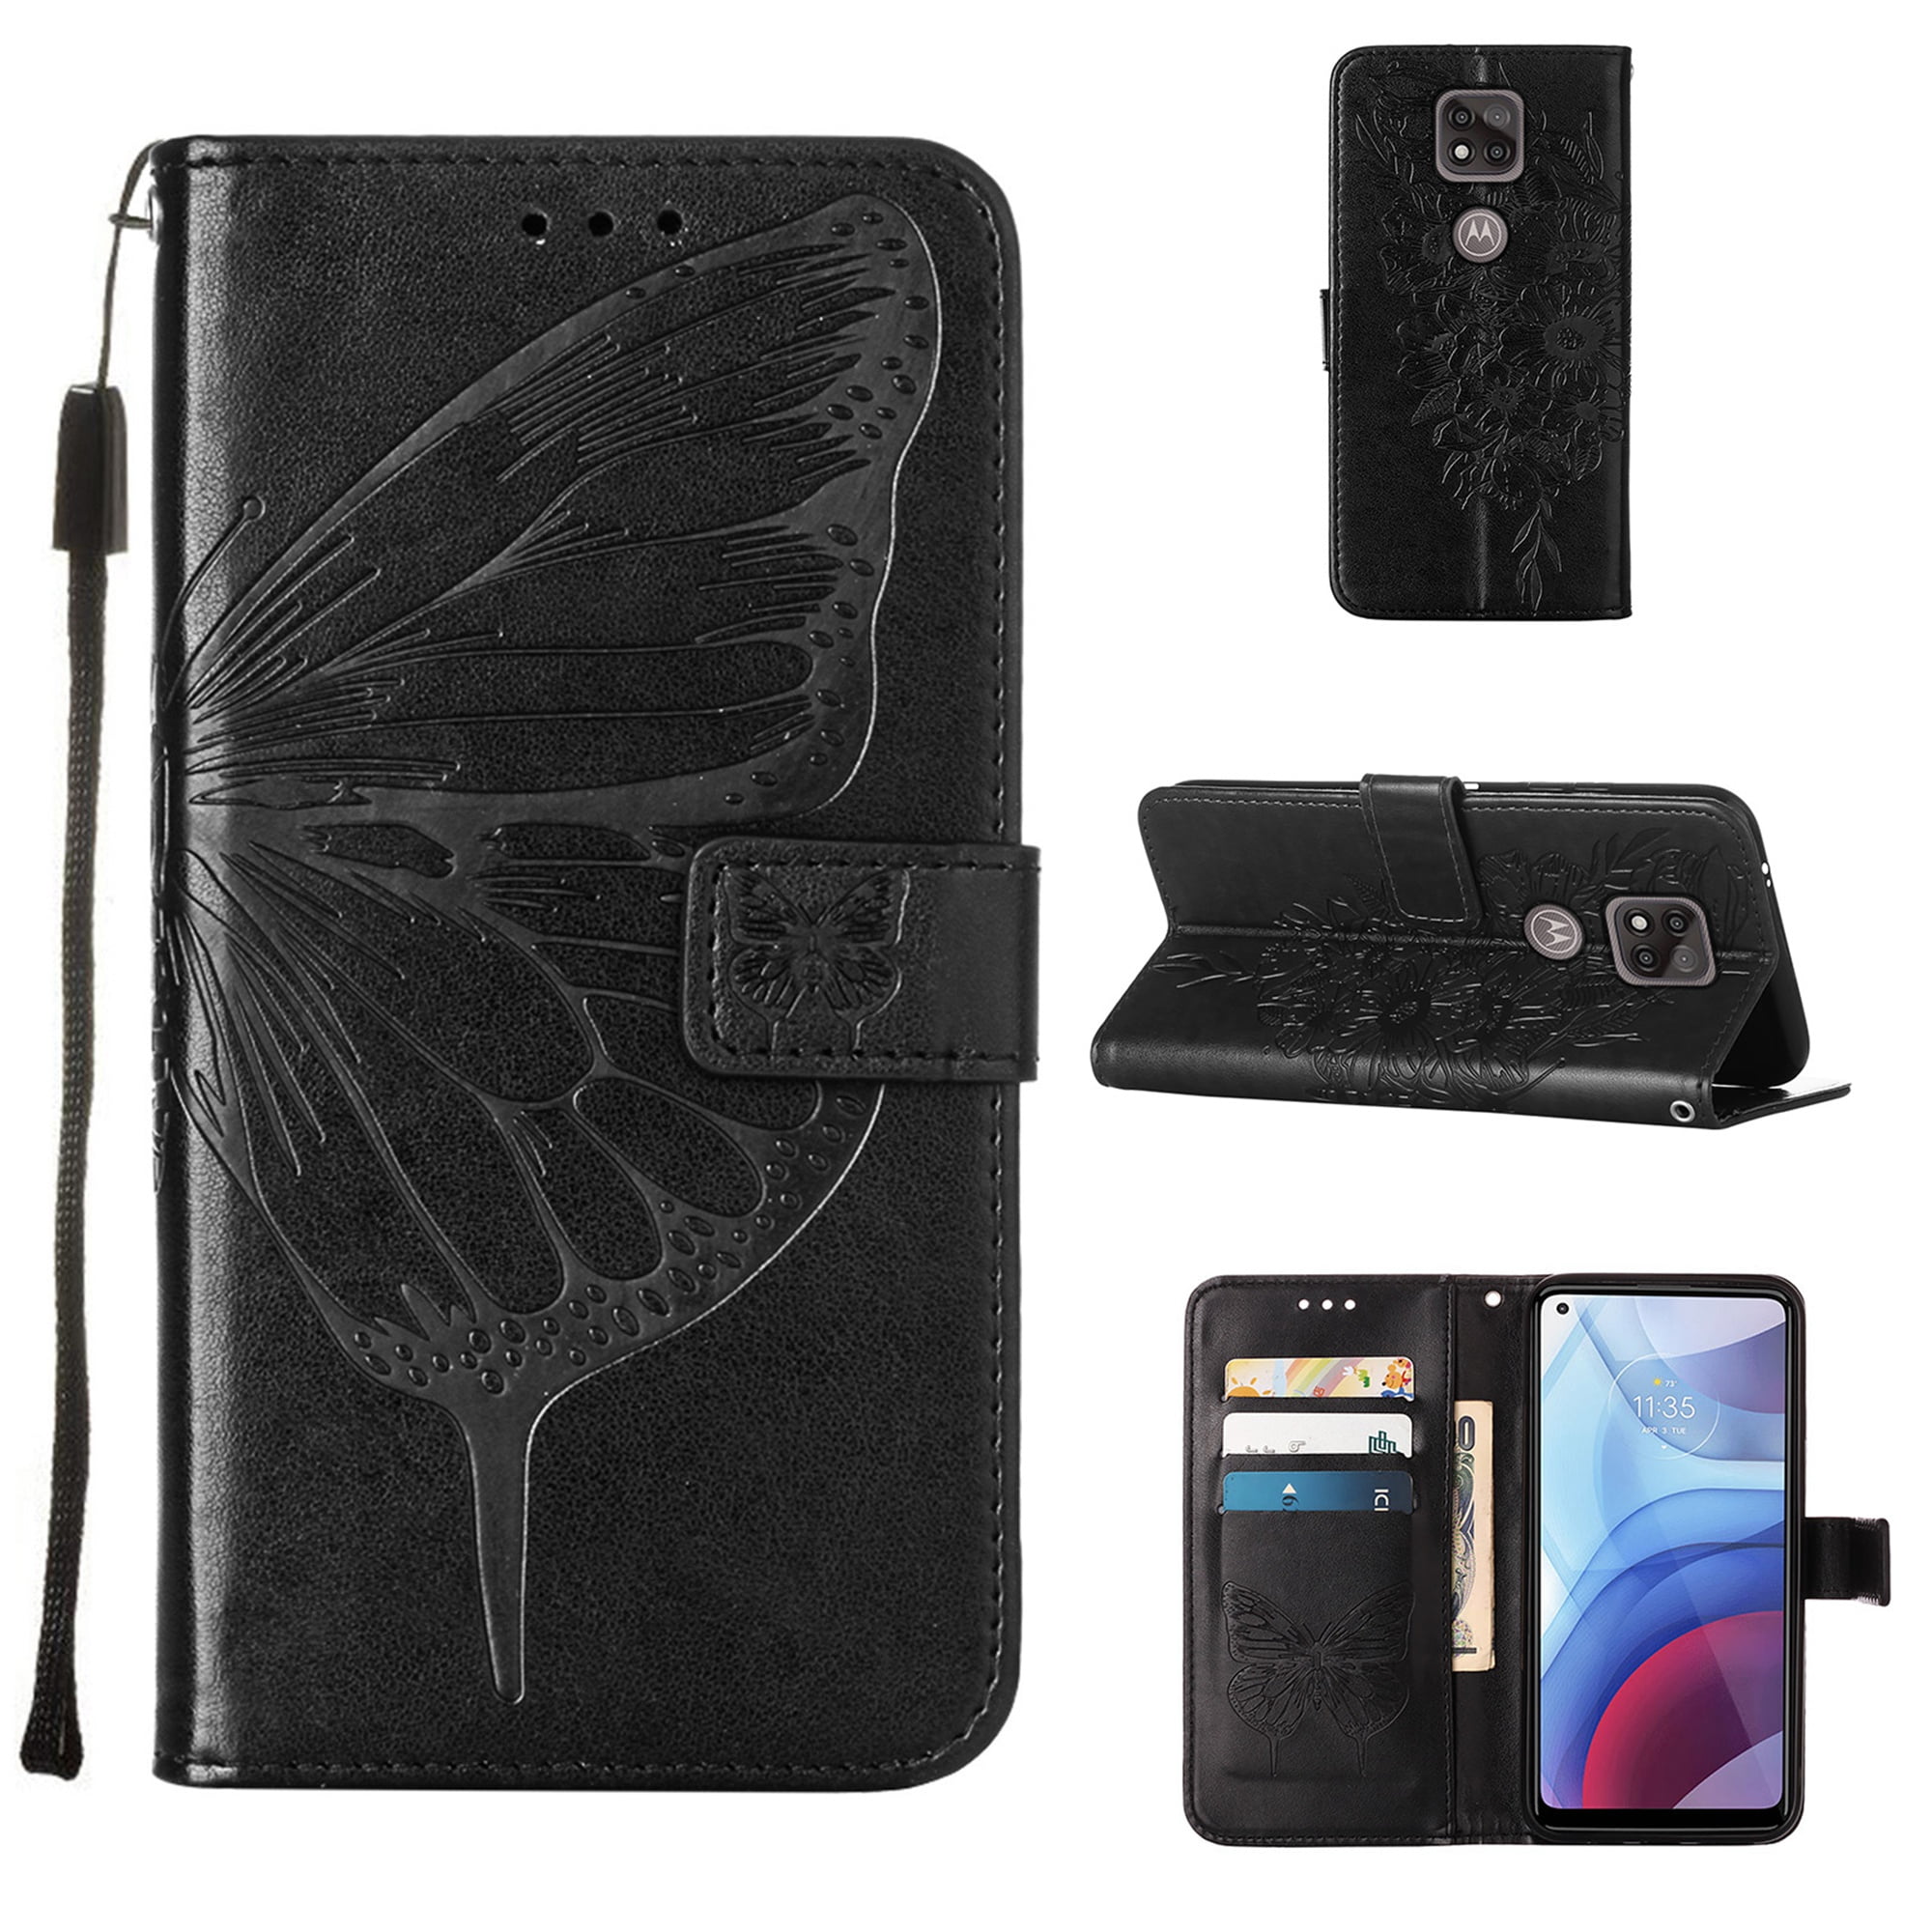 Stylish 2 Pack STENES Bling Wallet Case Compatible with Sony Xperia 1 3D Handmade Butterfly Flowers Floral Leather Cover with Ring Stand Holder - Black 